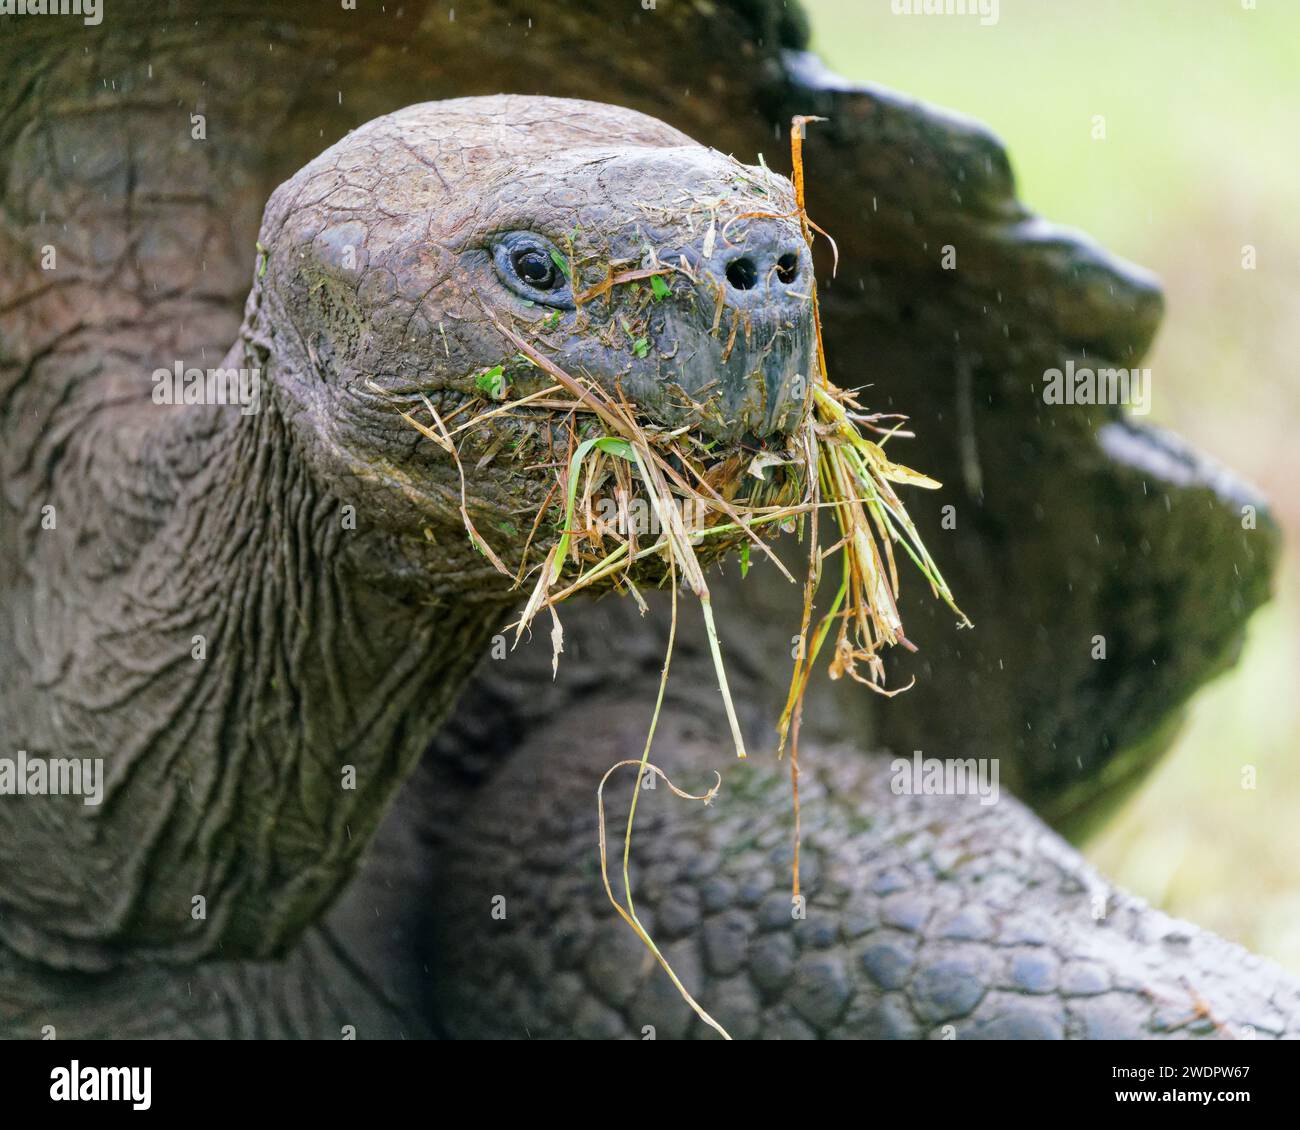 A Galapagos giant tortoise with domed shell eating grass. Santa Cruz island, one of the Galapagos Islands in Ecuador Stock Photo